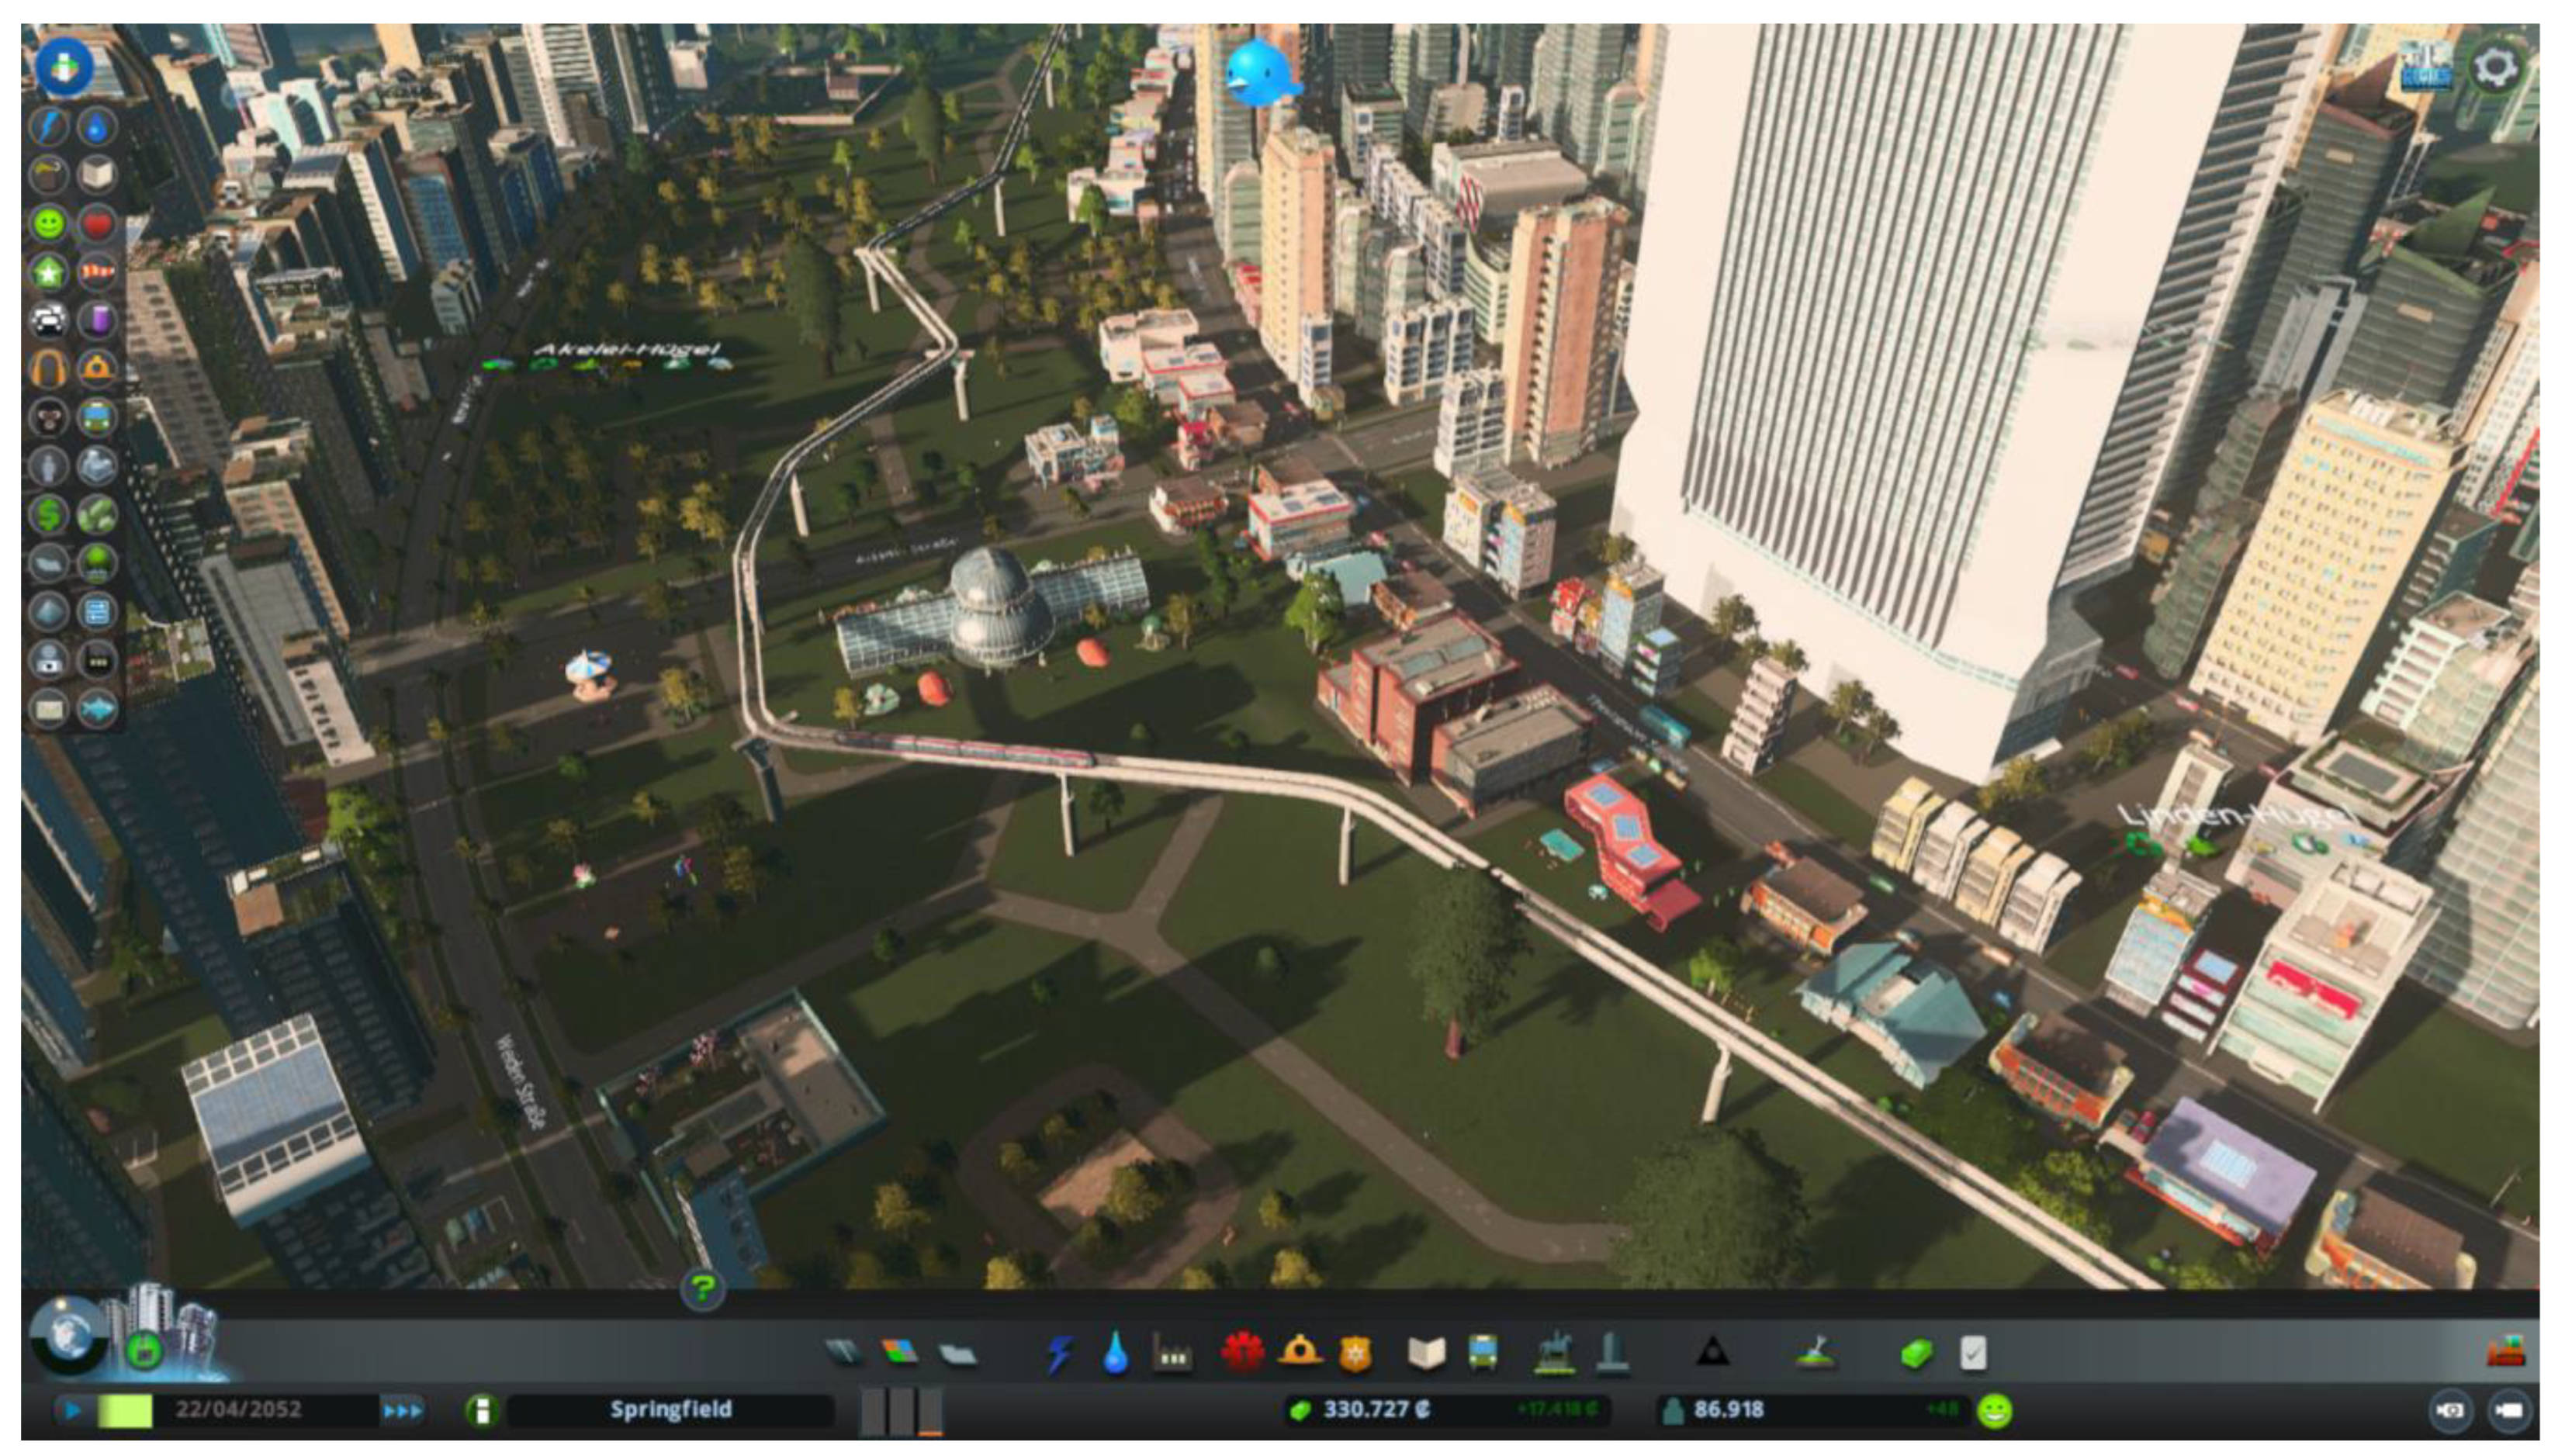 The Cities: Skylines 2 Roadway Tools Incorporate at least 8 Amazing Mods! 